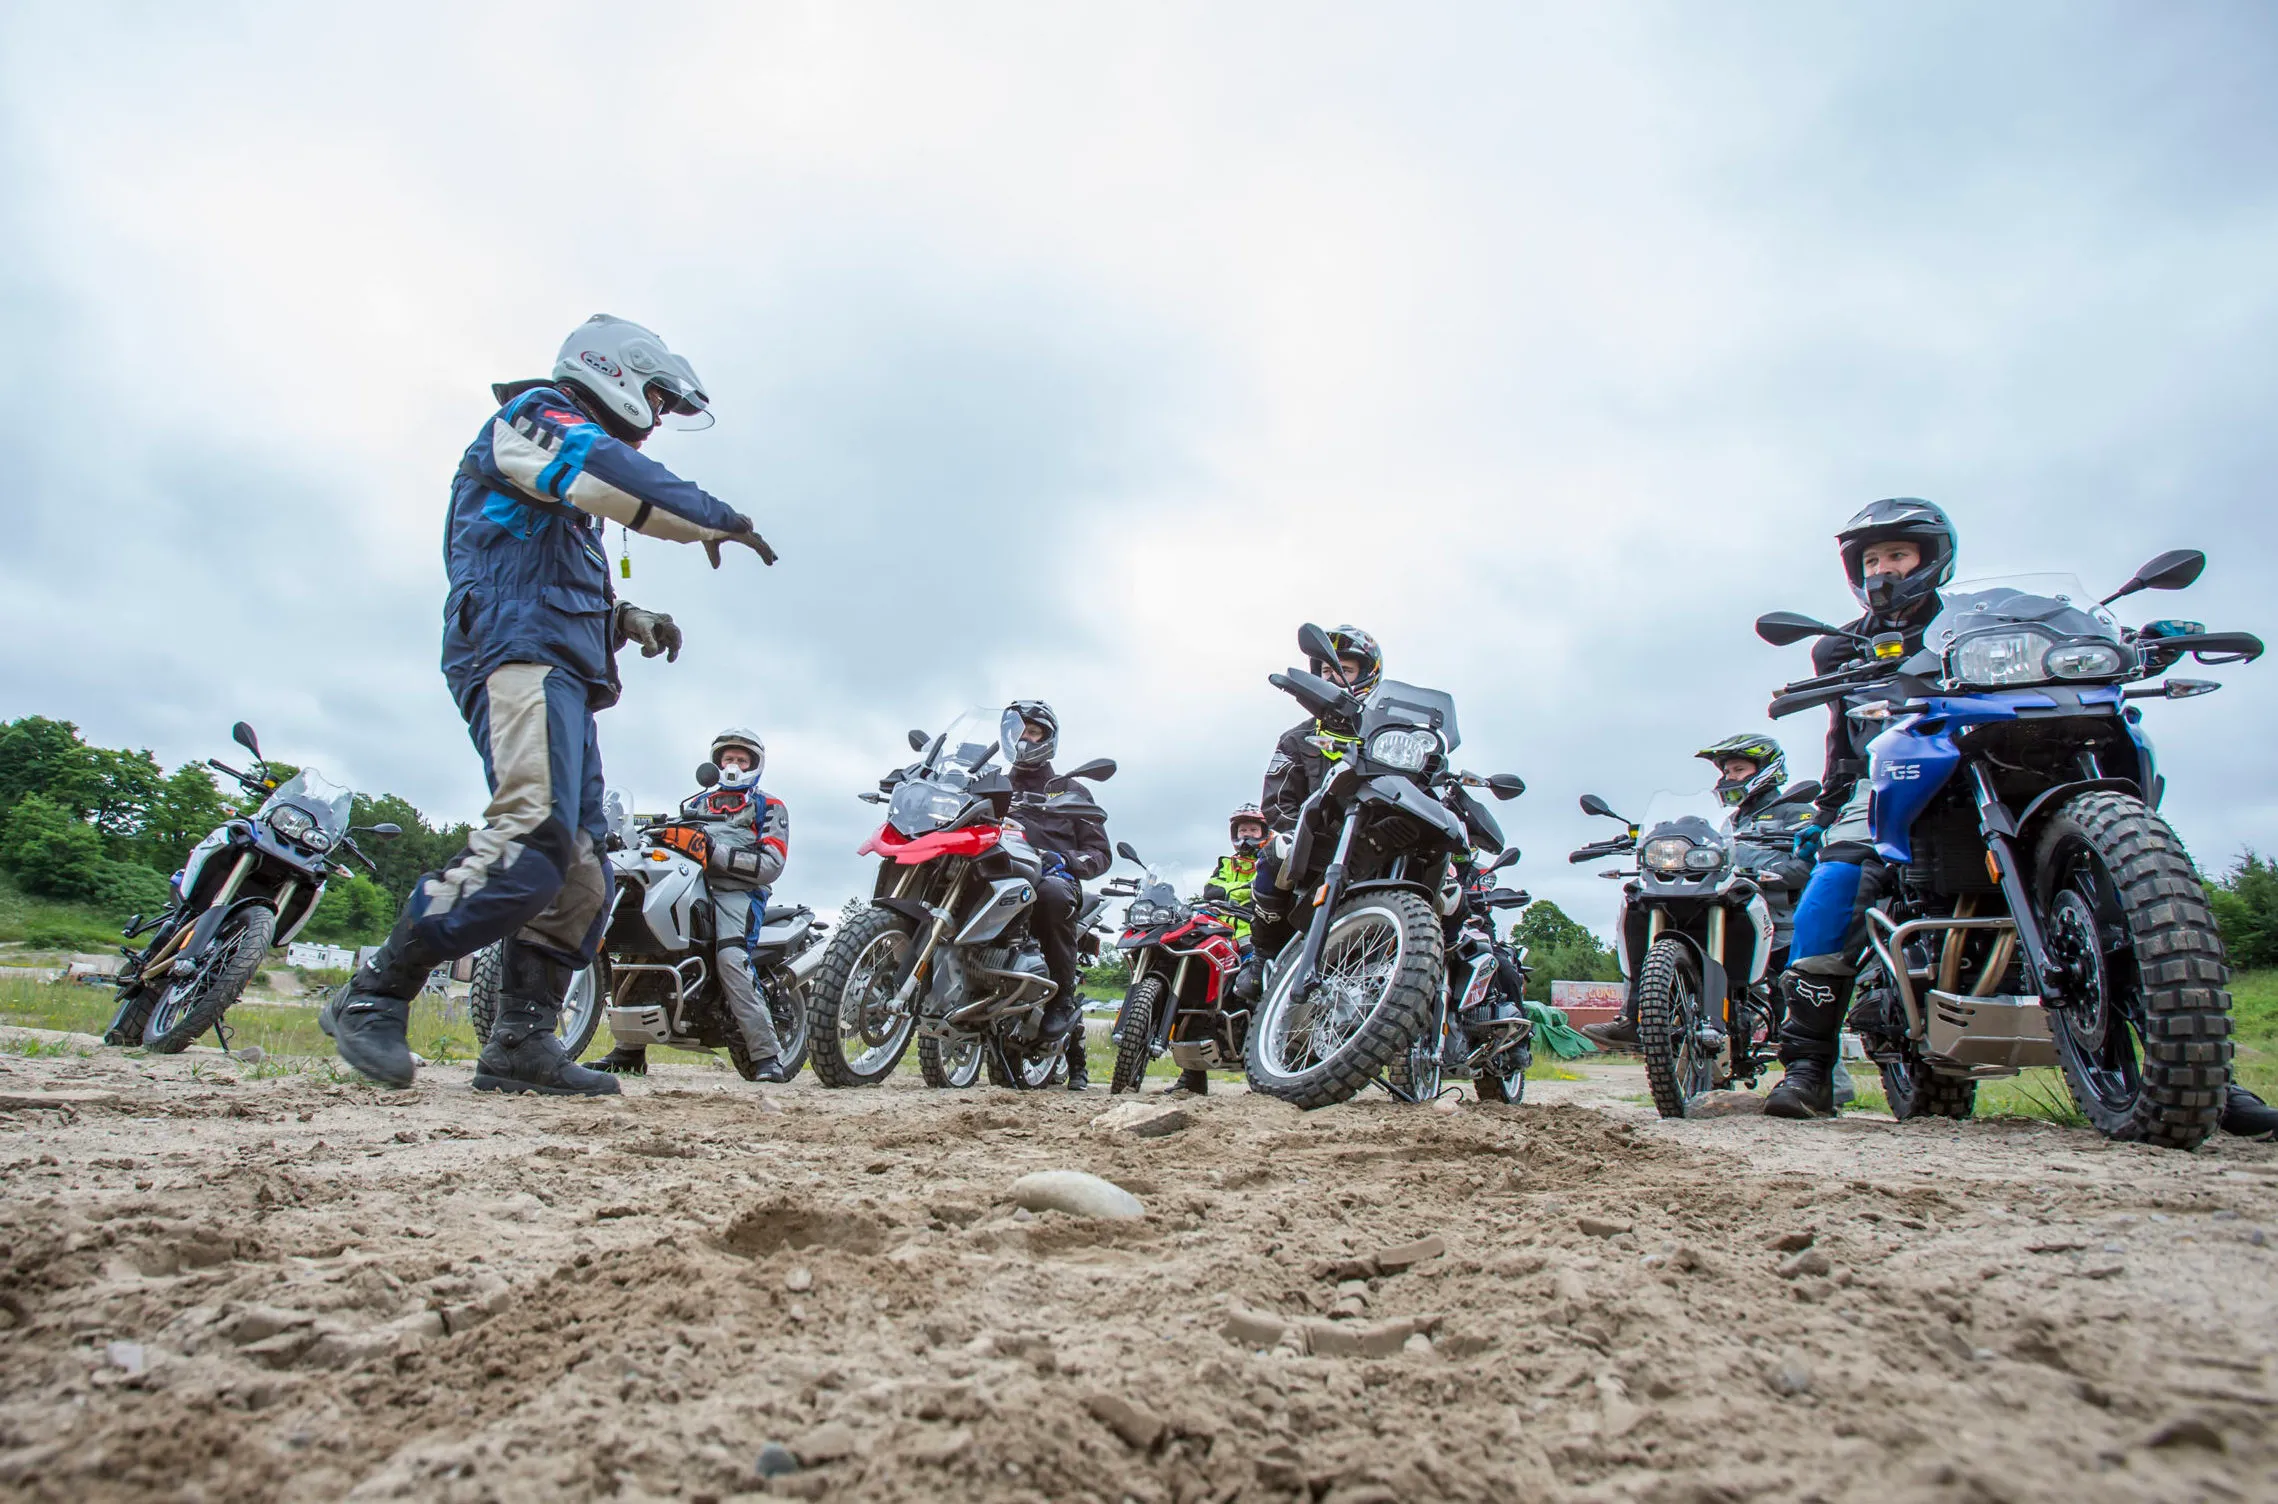 A Beginner's Guide to Motorcycle Adventure Riding